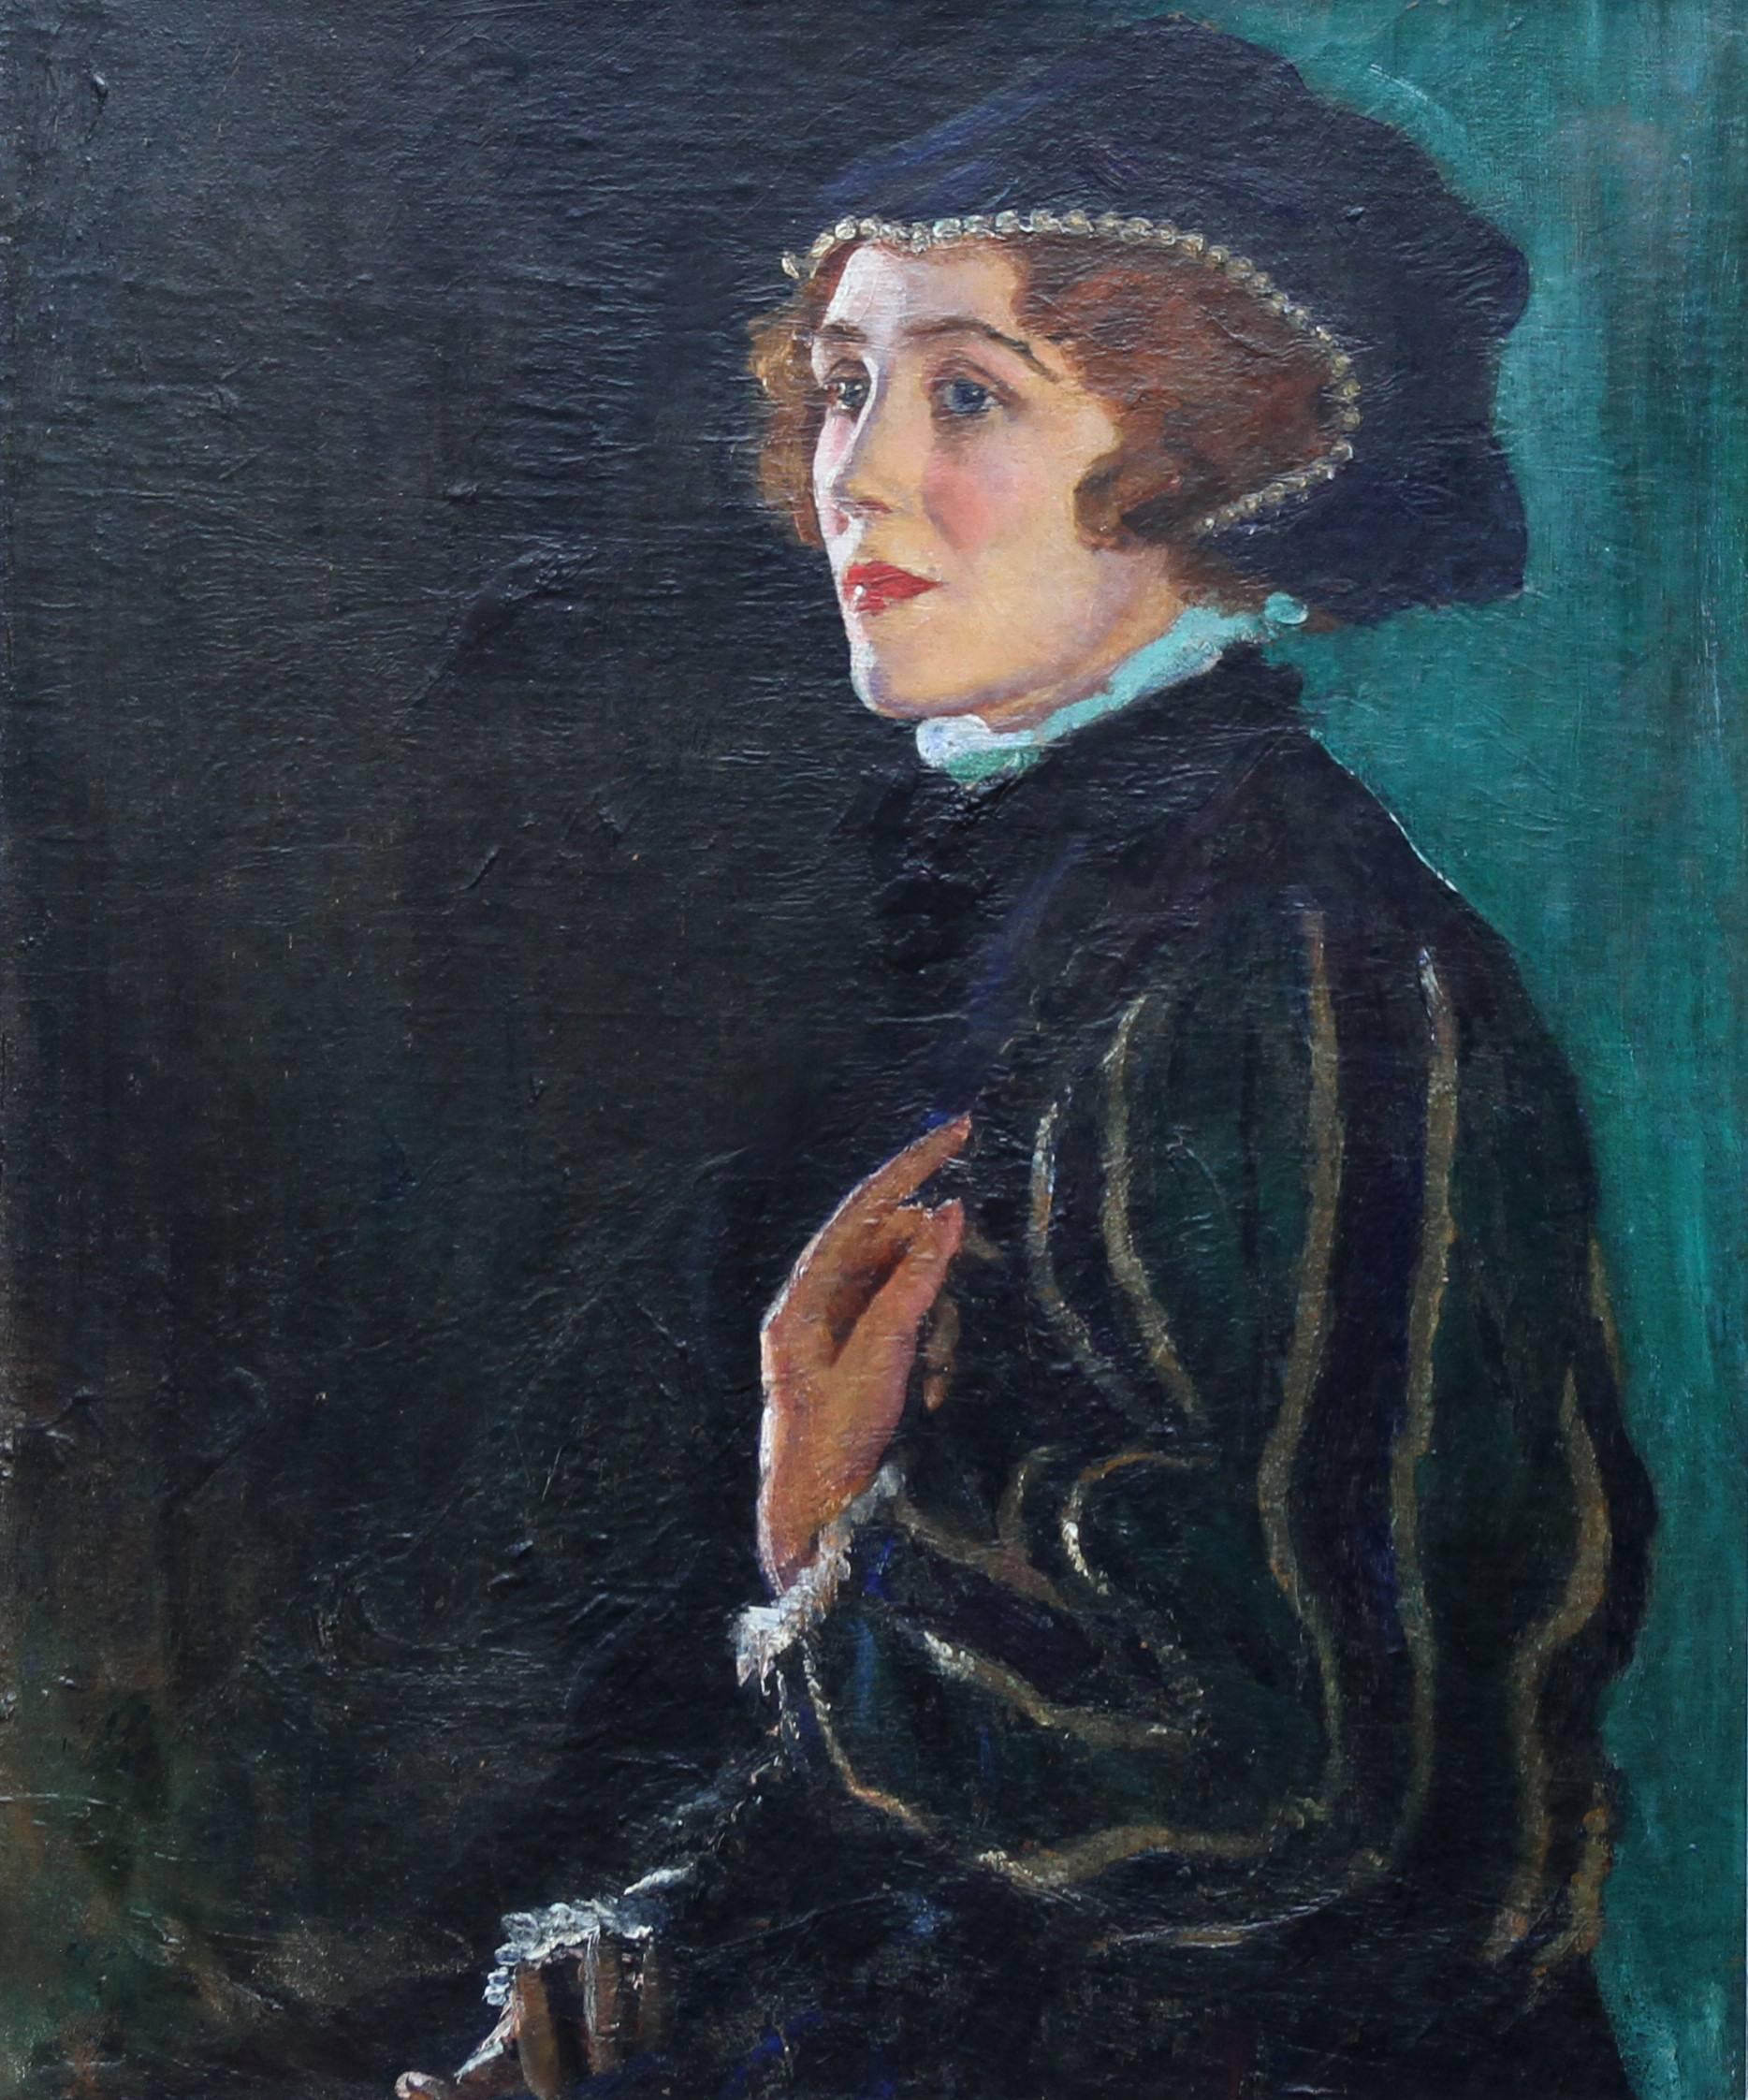 Cecily Byrne as Mary Stewart - British art 30's actress portrait oil painting - Painting by George Carr Drinkwater